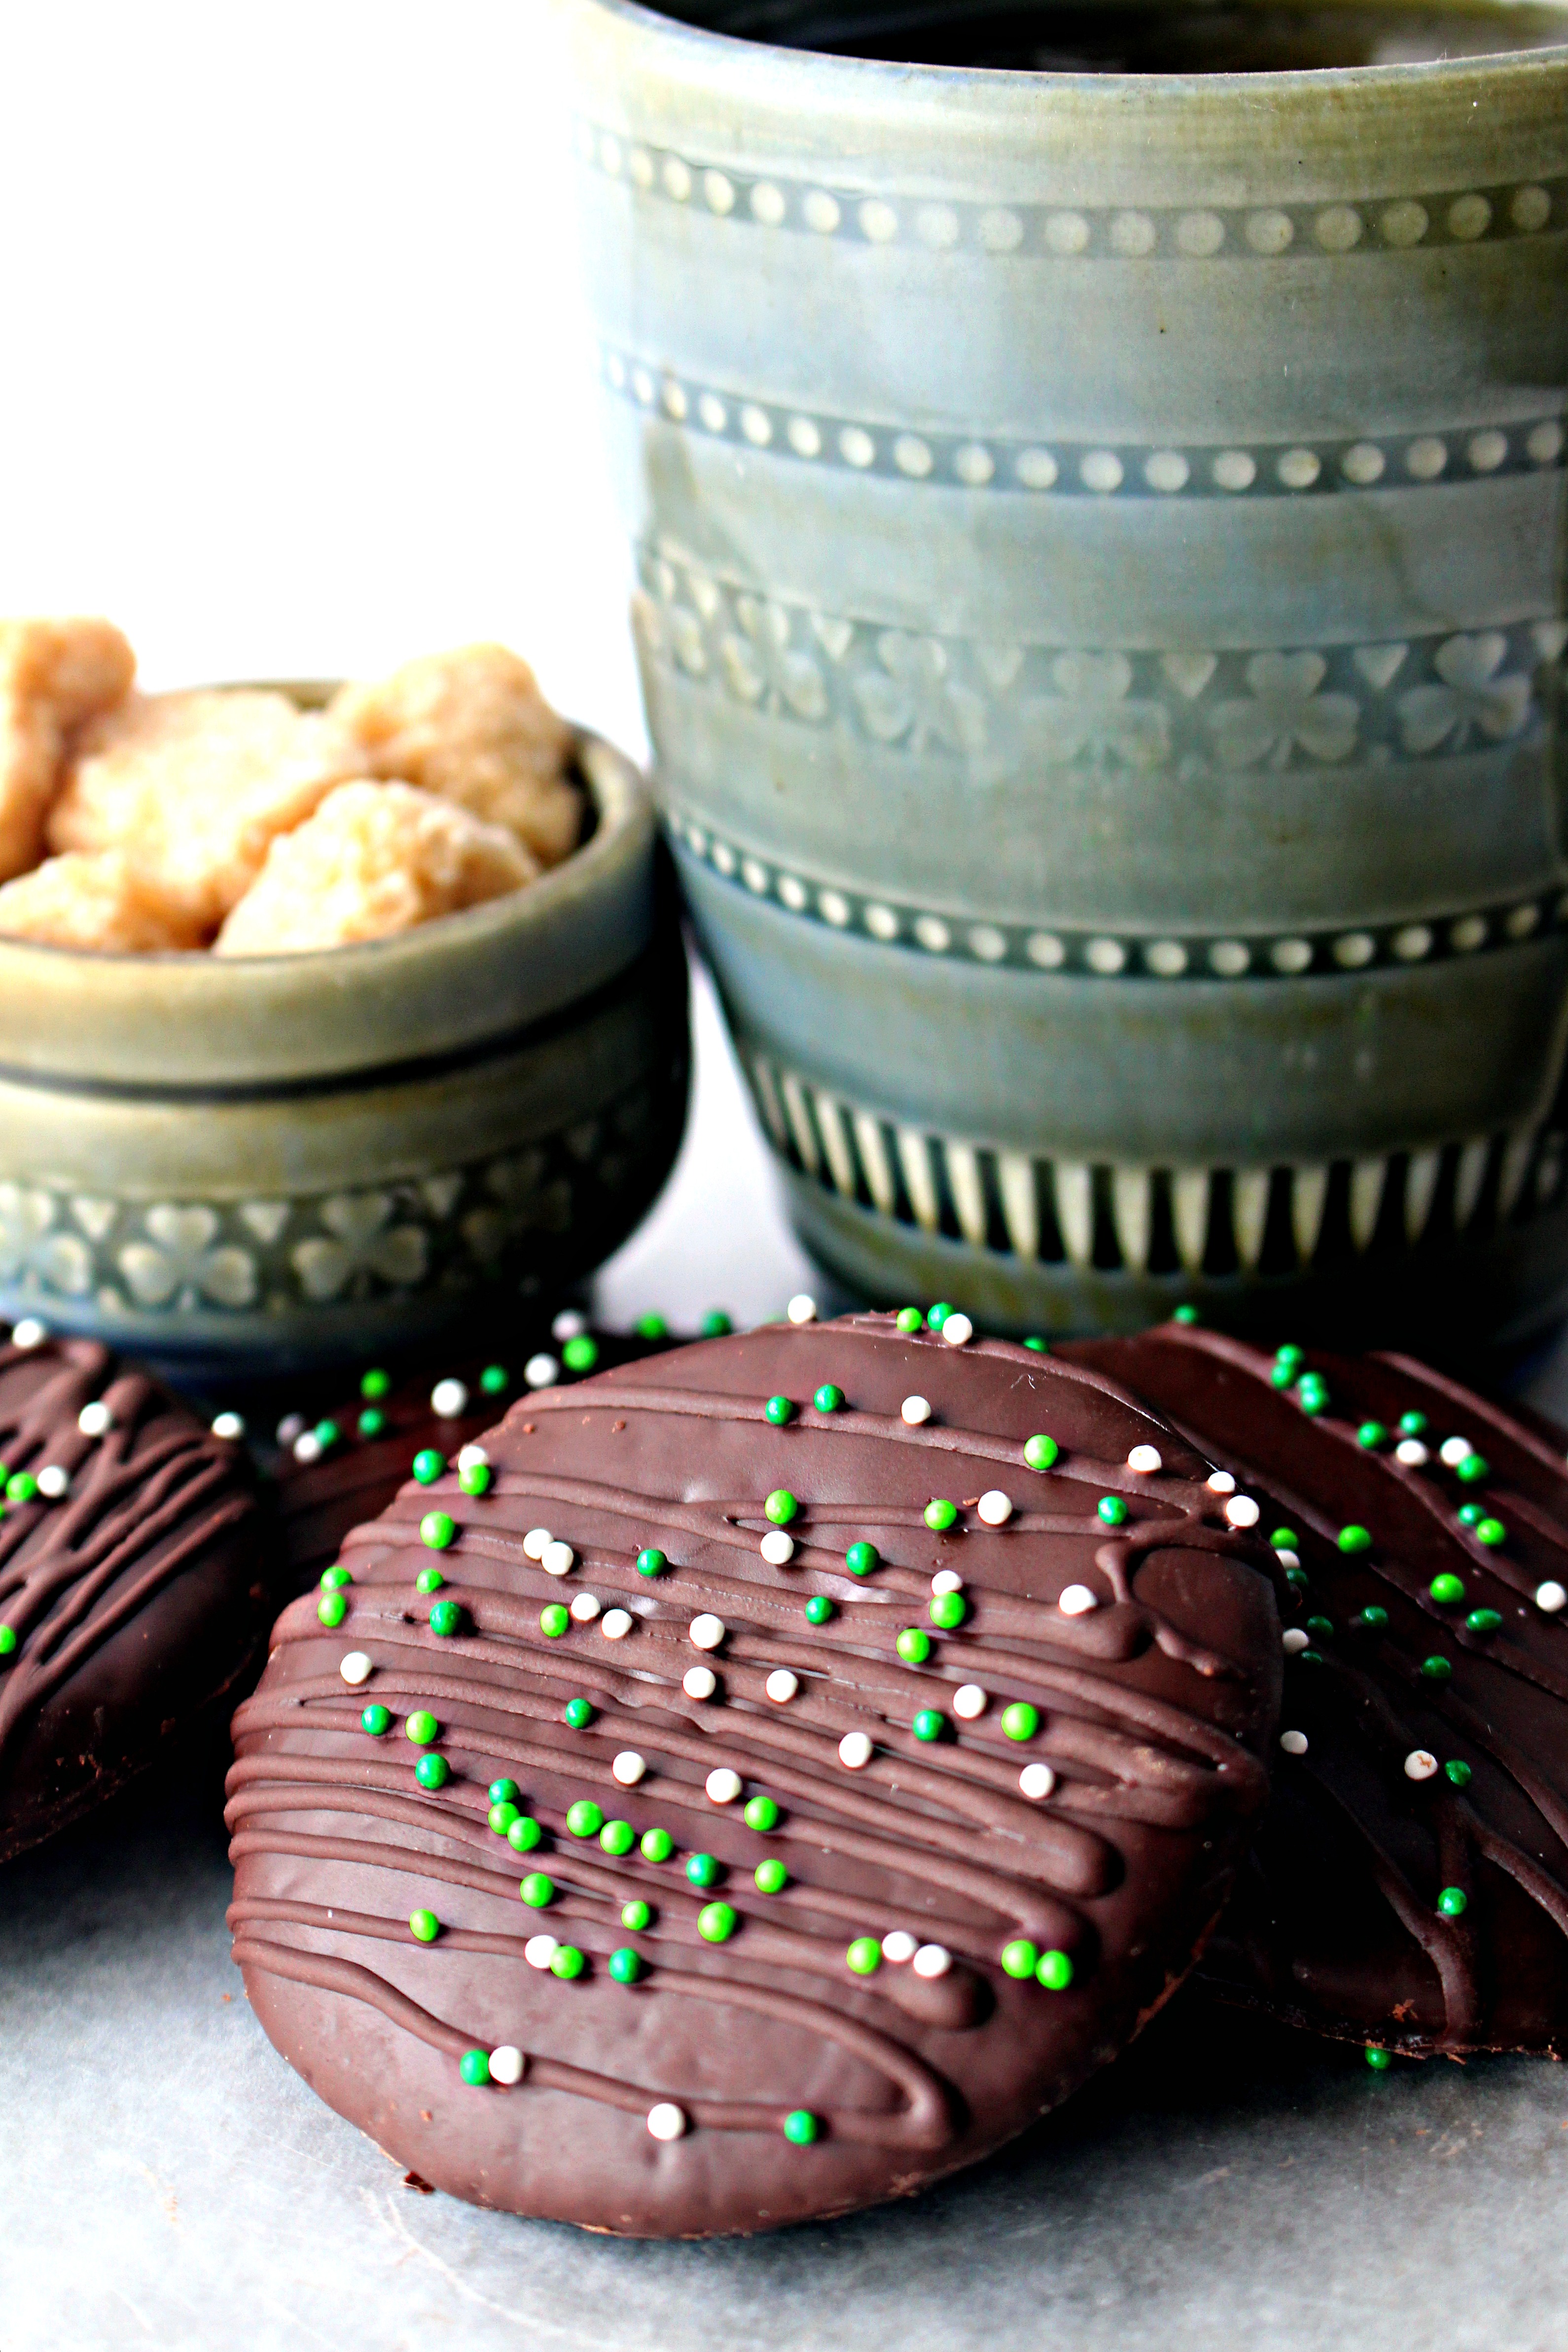 Chocolate Covered Chocolate Mint Cookies - The Monday Box